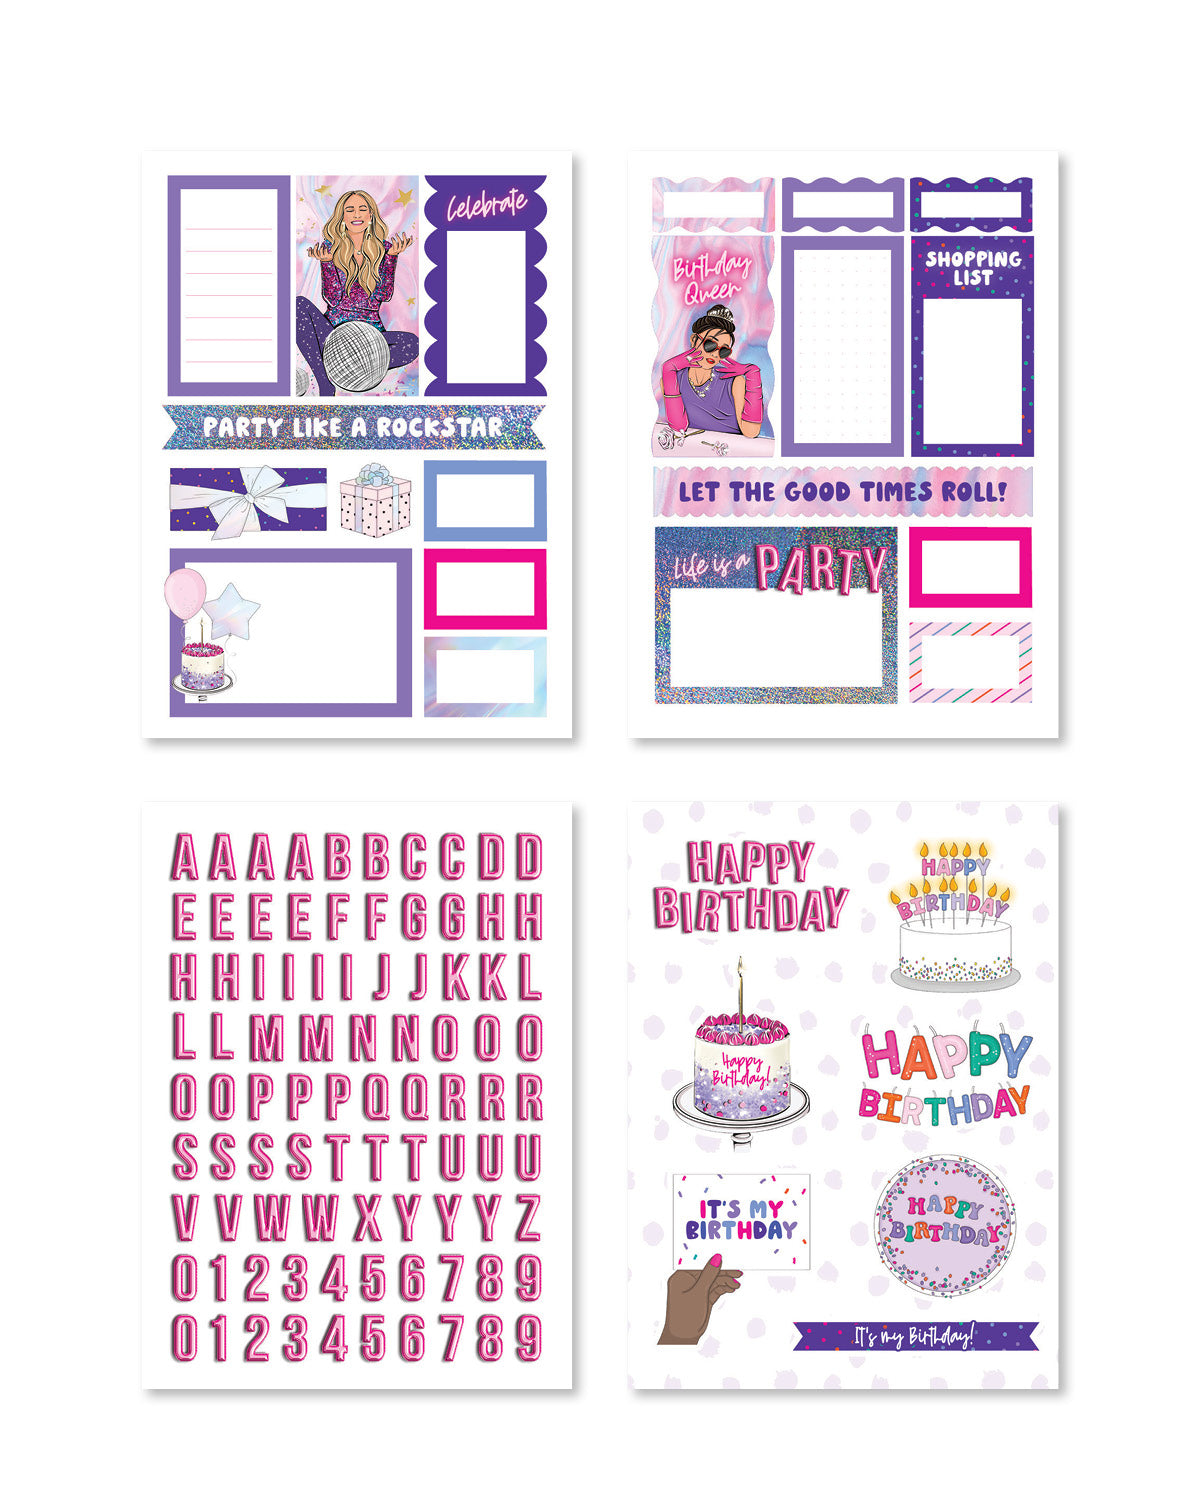 It's My Birthday Digital Sticker Pack - Shop Rongrong - Rongrong DeVoe